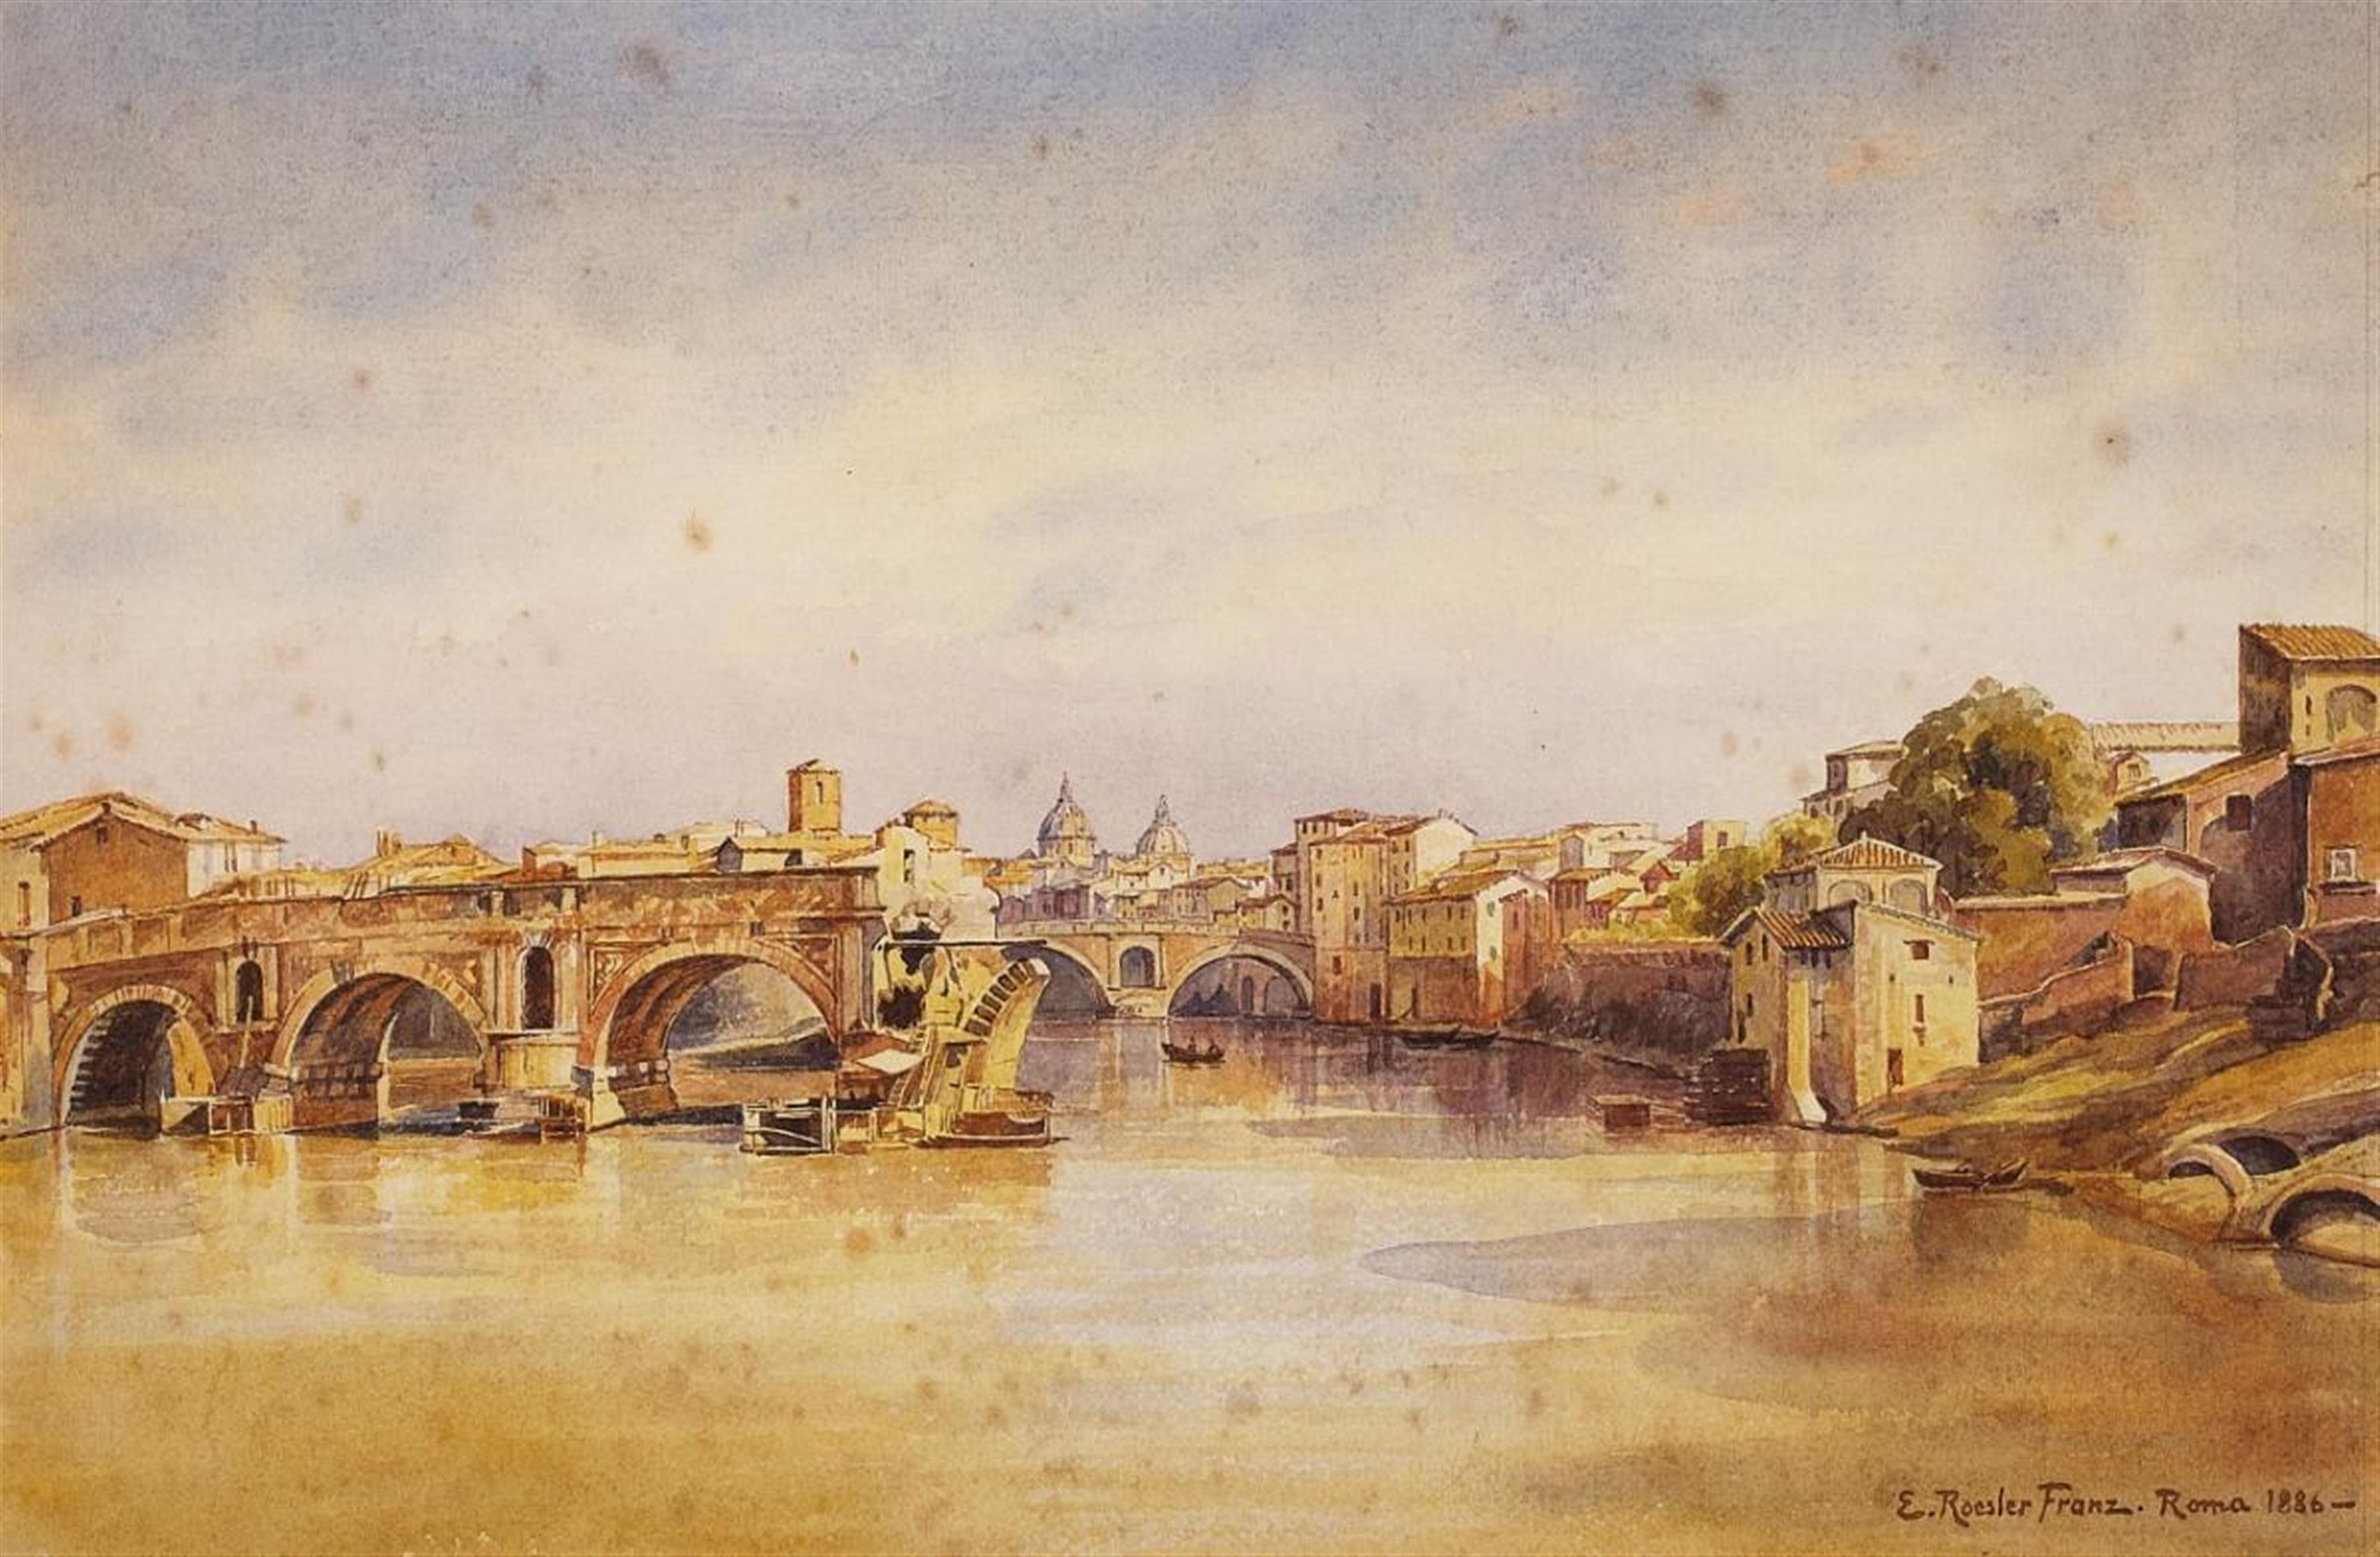 Ettore Roesler Franz - PONTE ROTO IN ROME - image-1